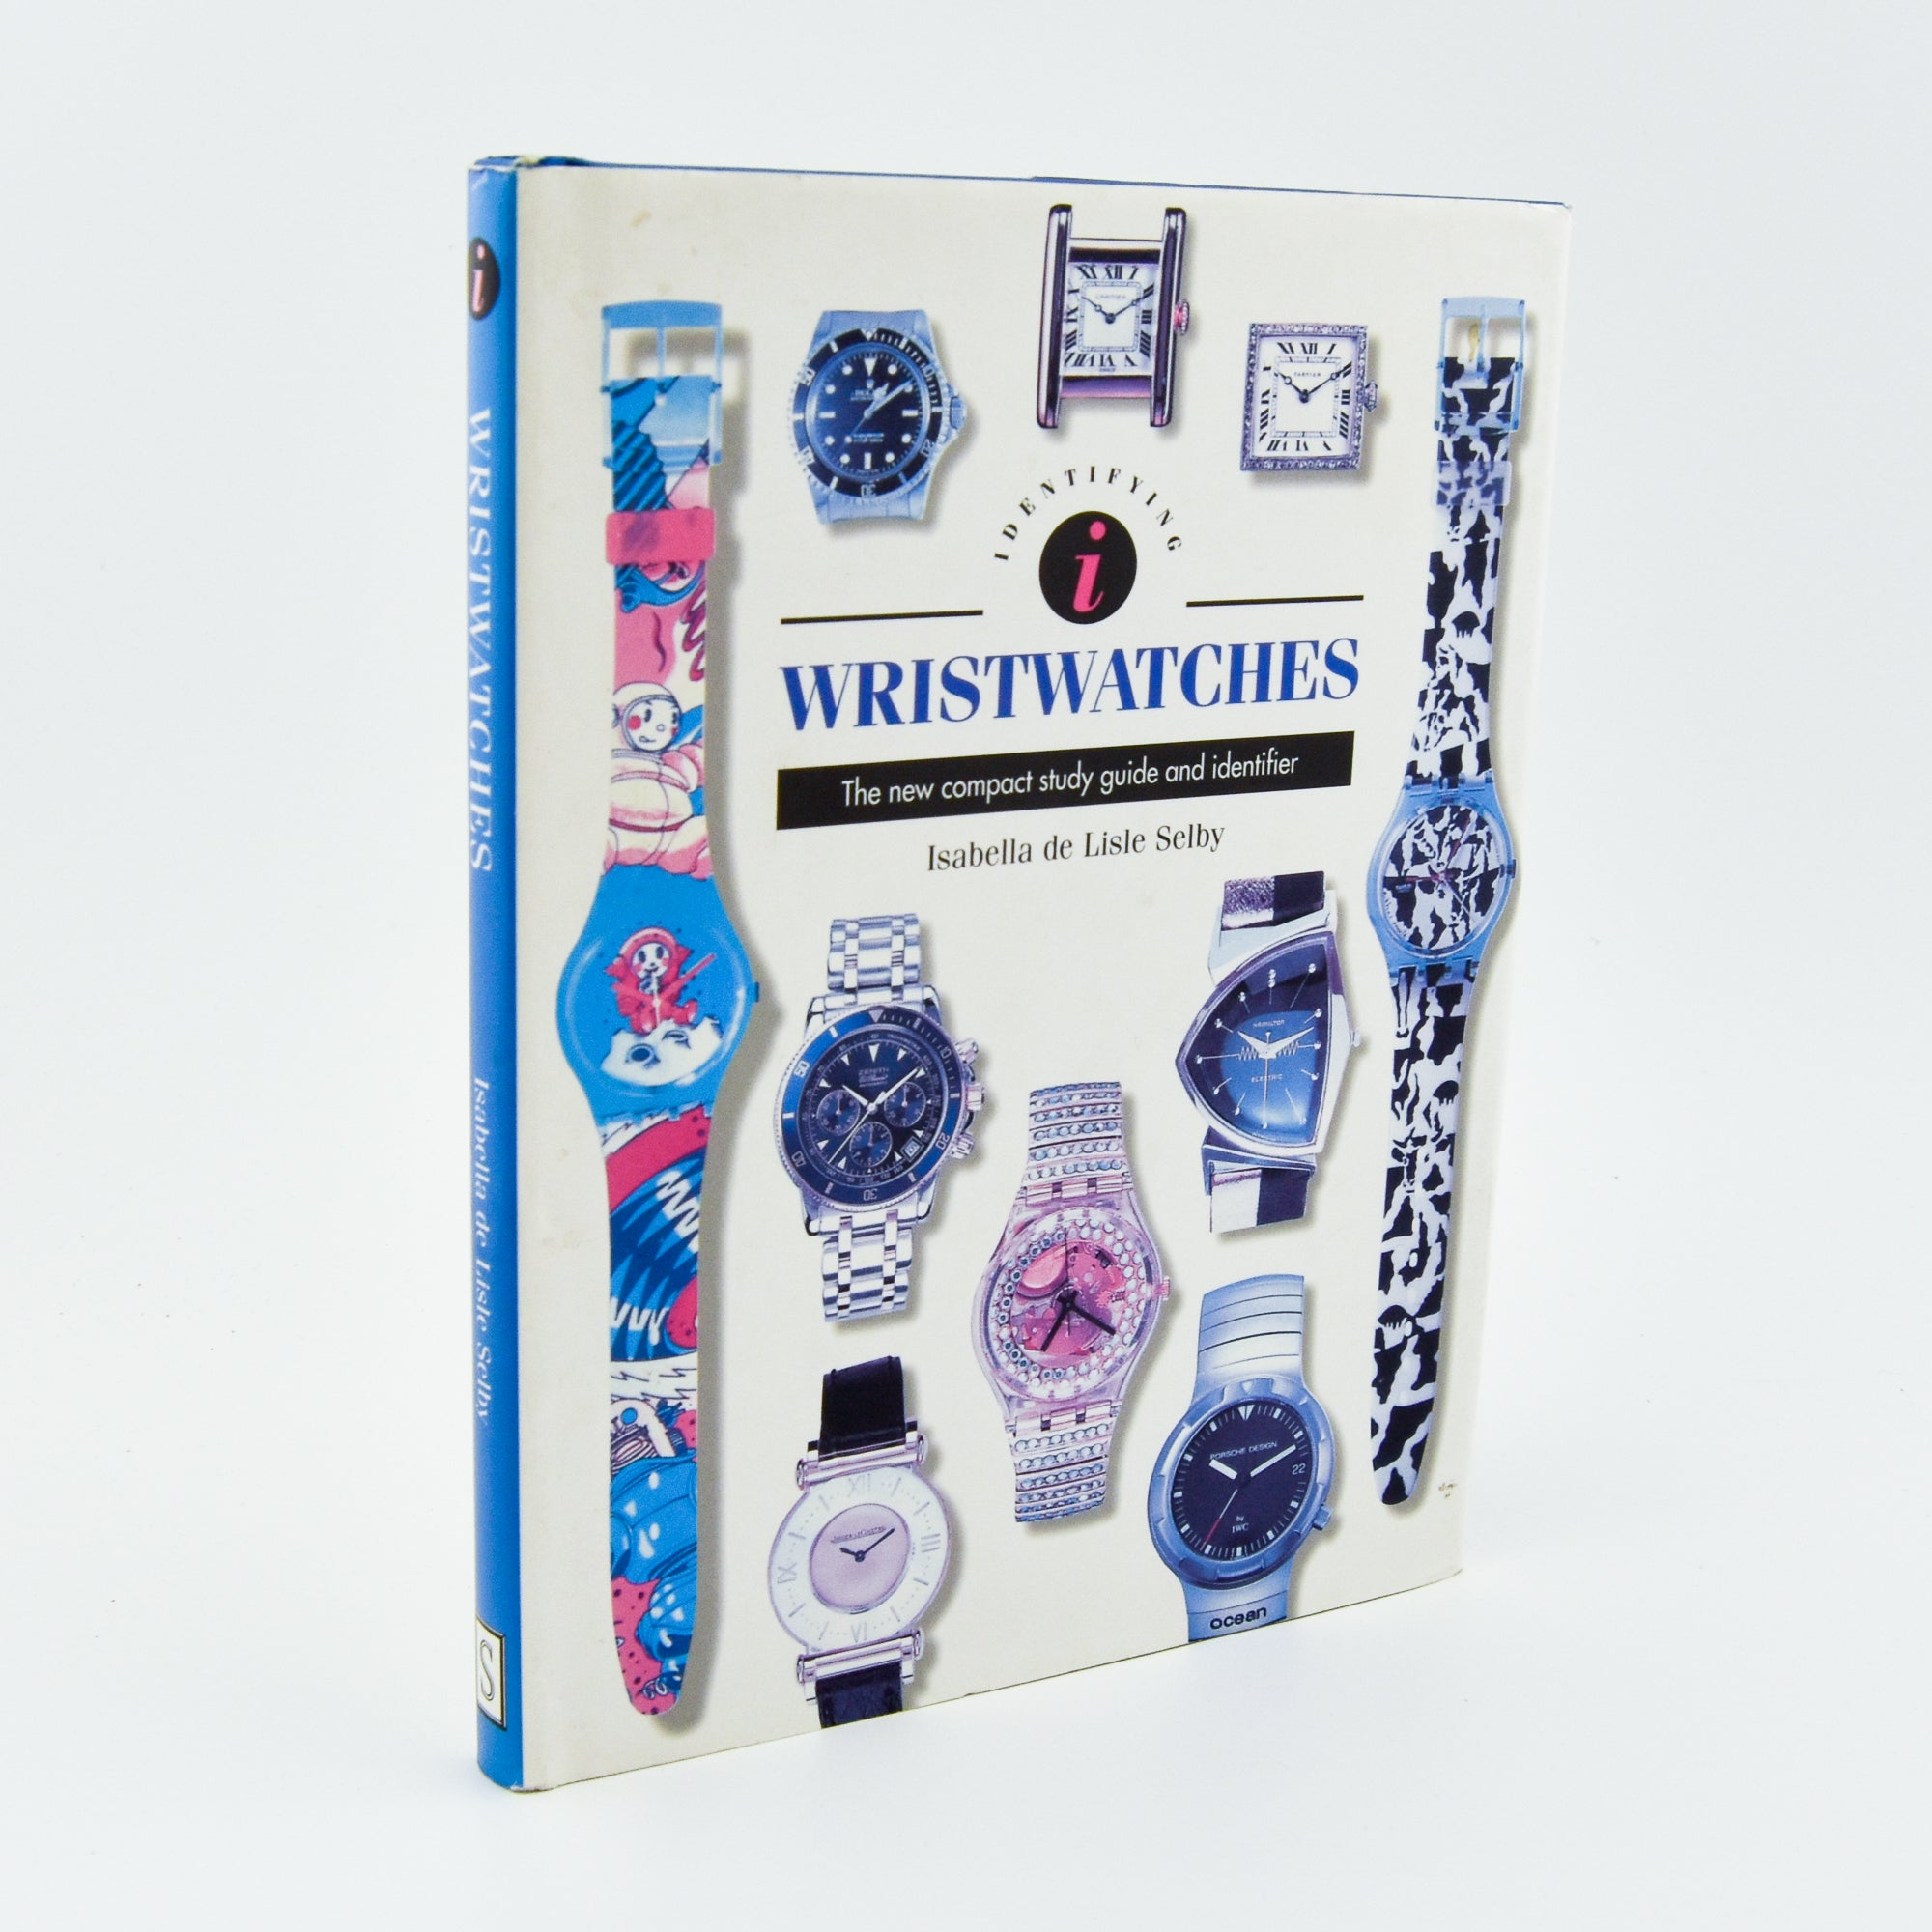 Identifying Wristwatches by Isabella de lisle selby